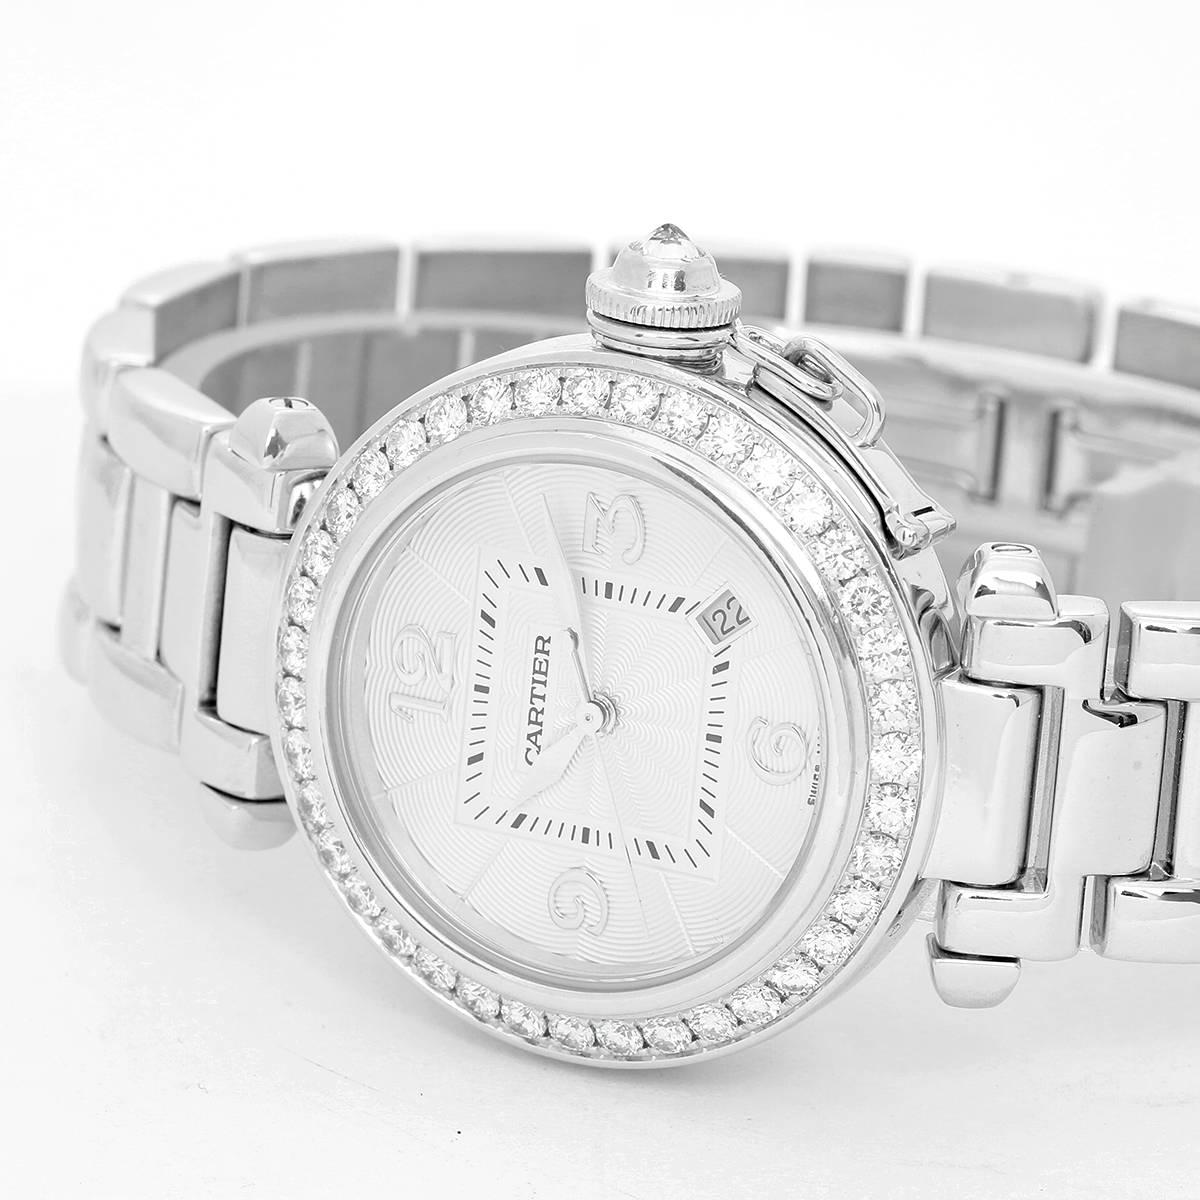 Cartier Pasha 18k White Gold & Diamond Automatic 32mm Ladies Watch -  Automatic winding. 18K White Gold round ( 32 mm ) with diamond bezel. Silvered Guilloche dial with Arabic numeral markers date displayed at 4 o'clock. 18k white gold Cartier Pasha